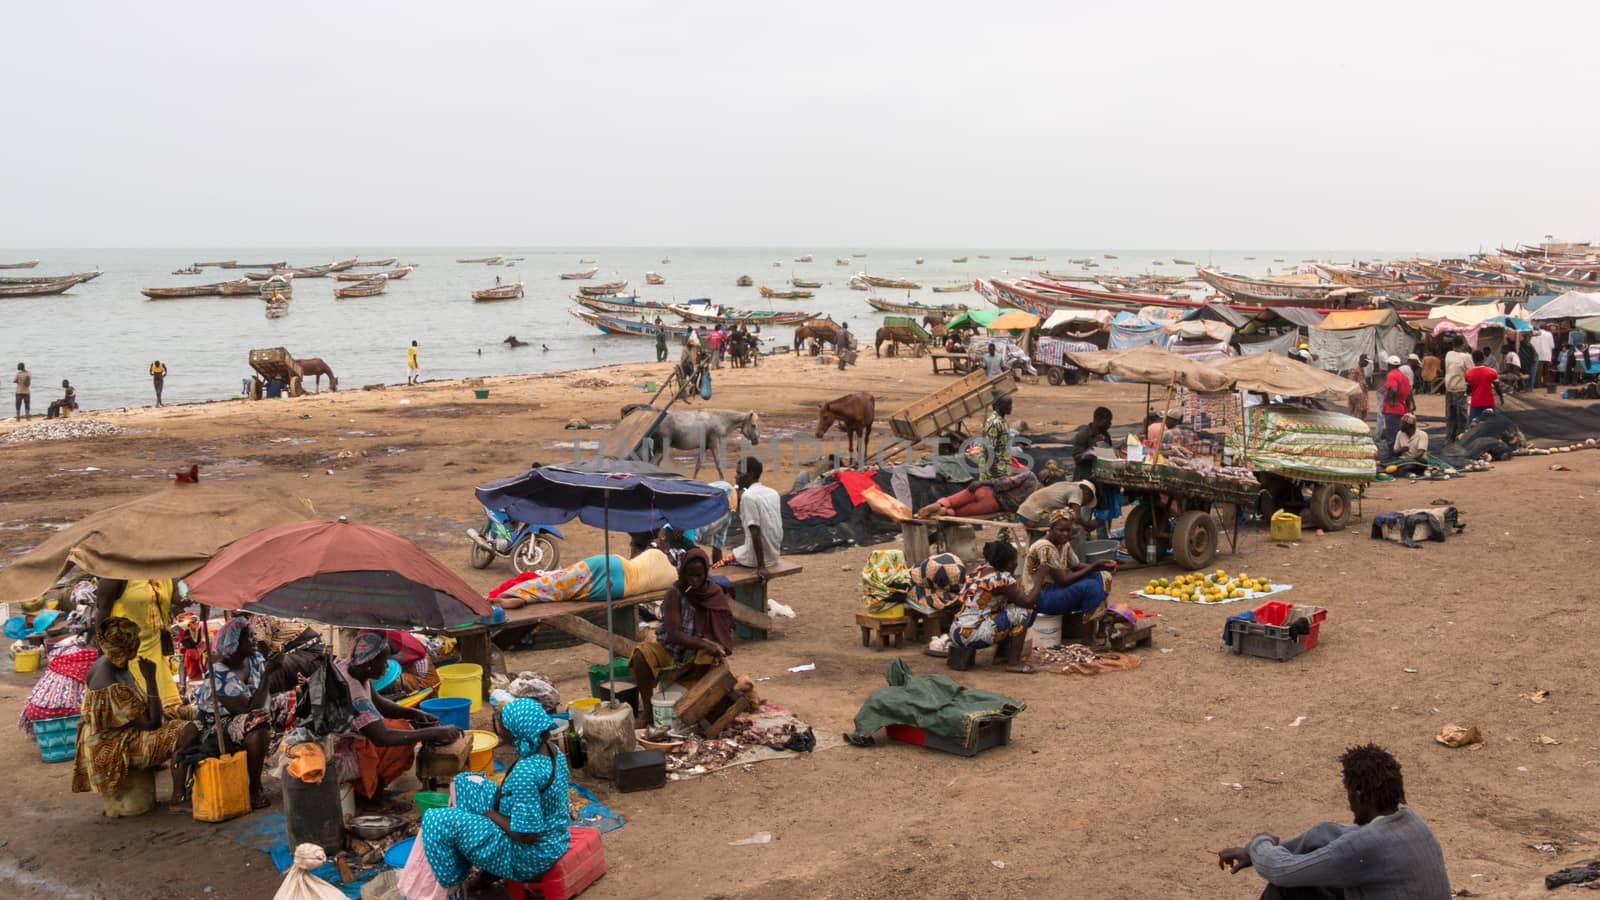 Mbour, Senegal - July, 2014: Several hundred people come together at the local fish market in Mbour to buy and sell the daily catch from the fishermen on July 9, 2014 in Mbour, Senegal.